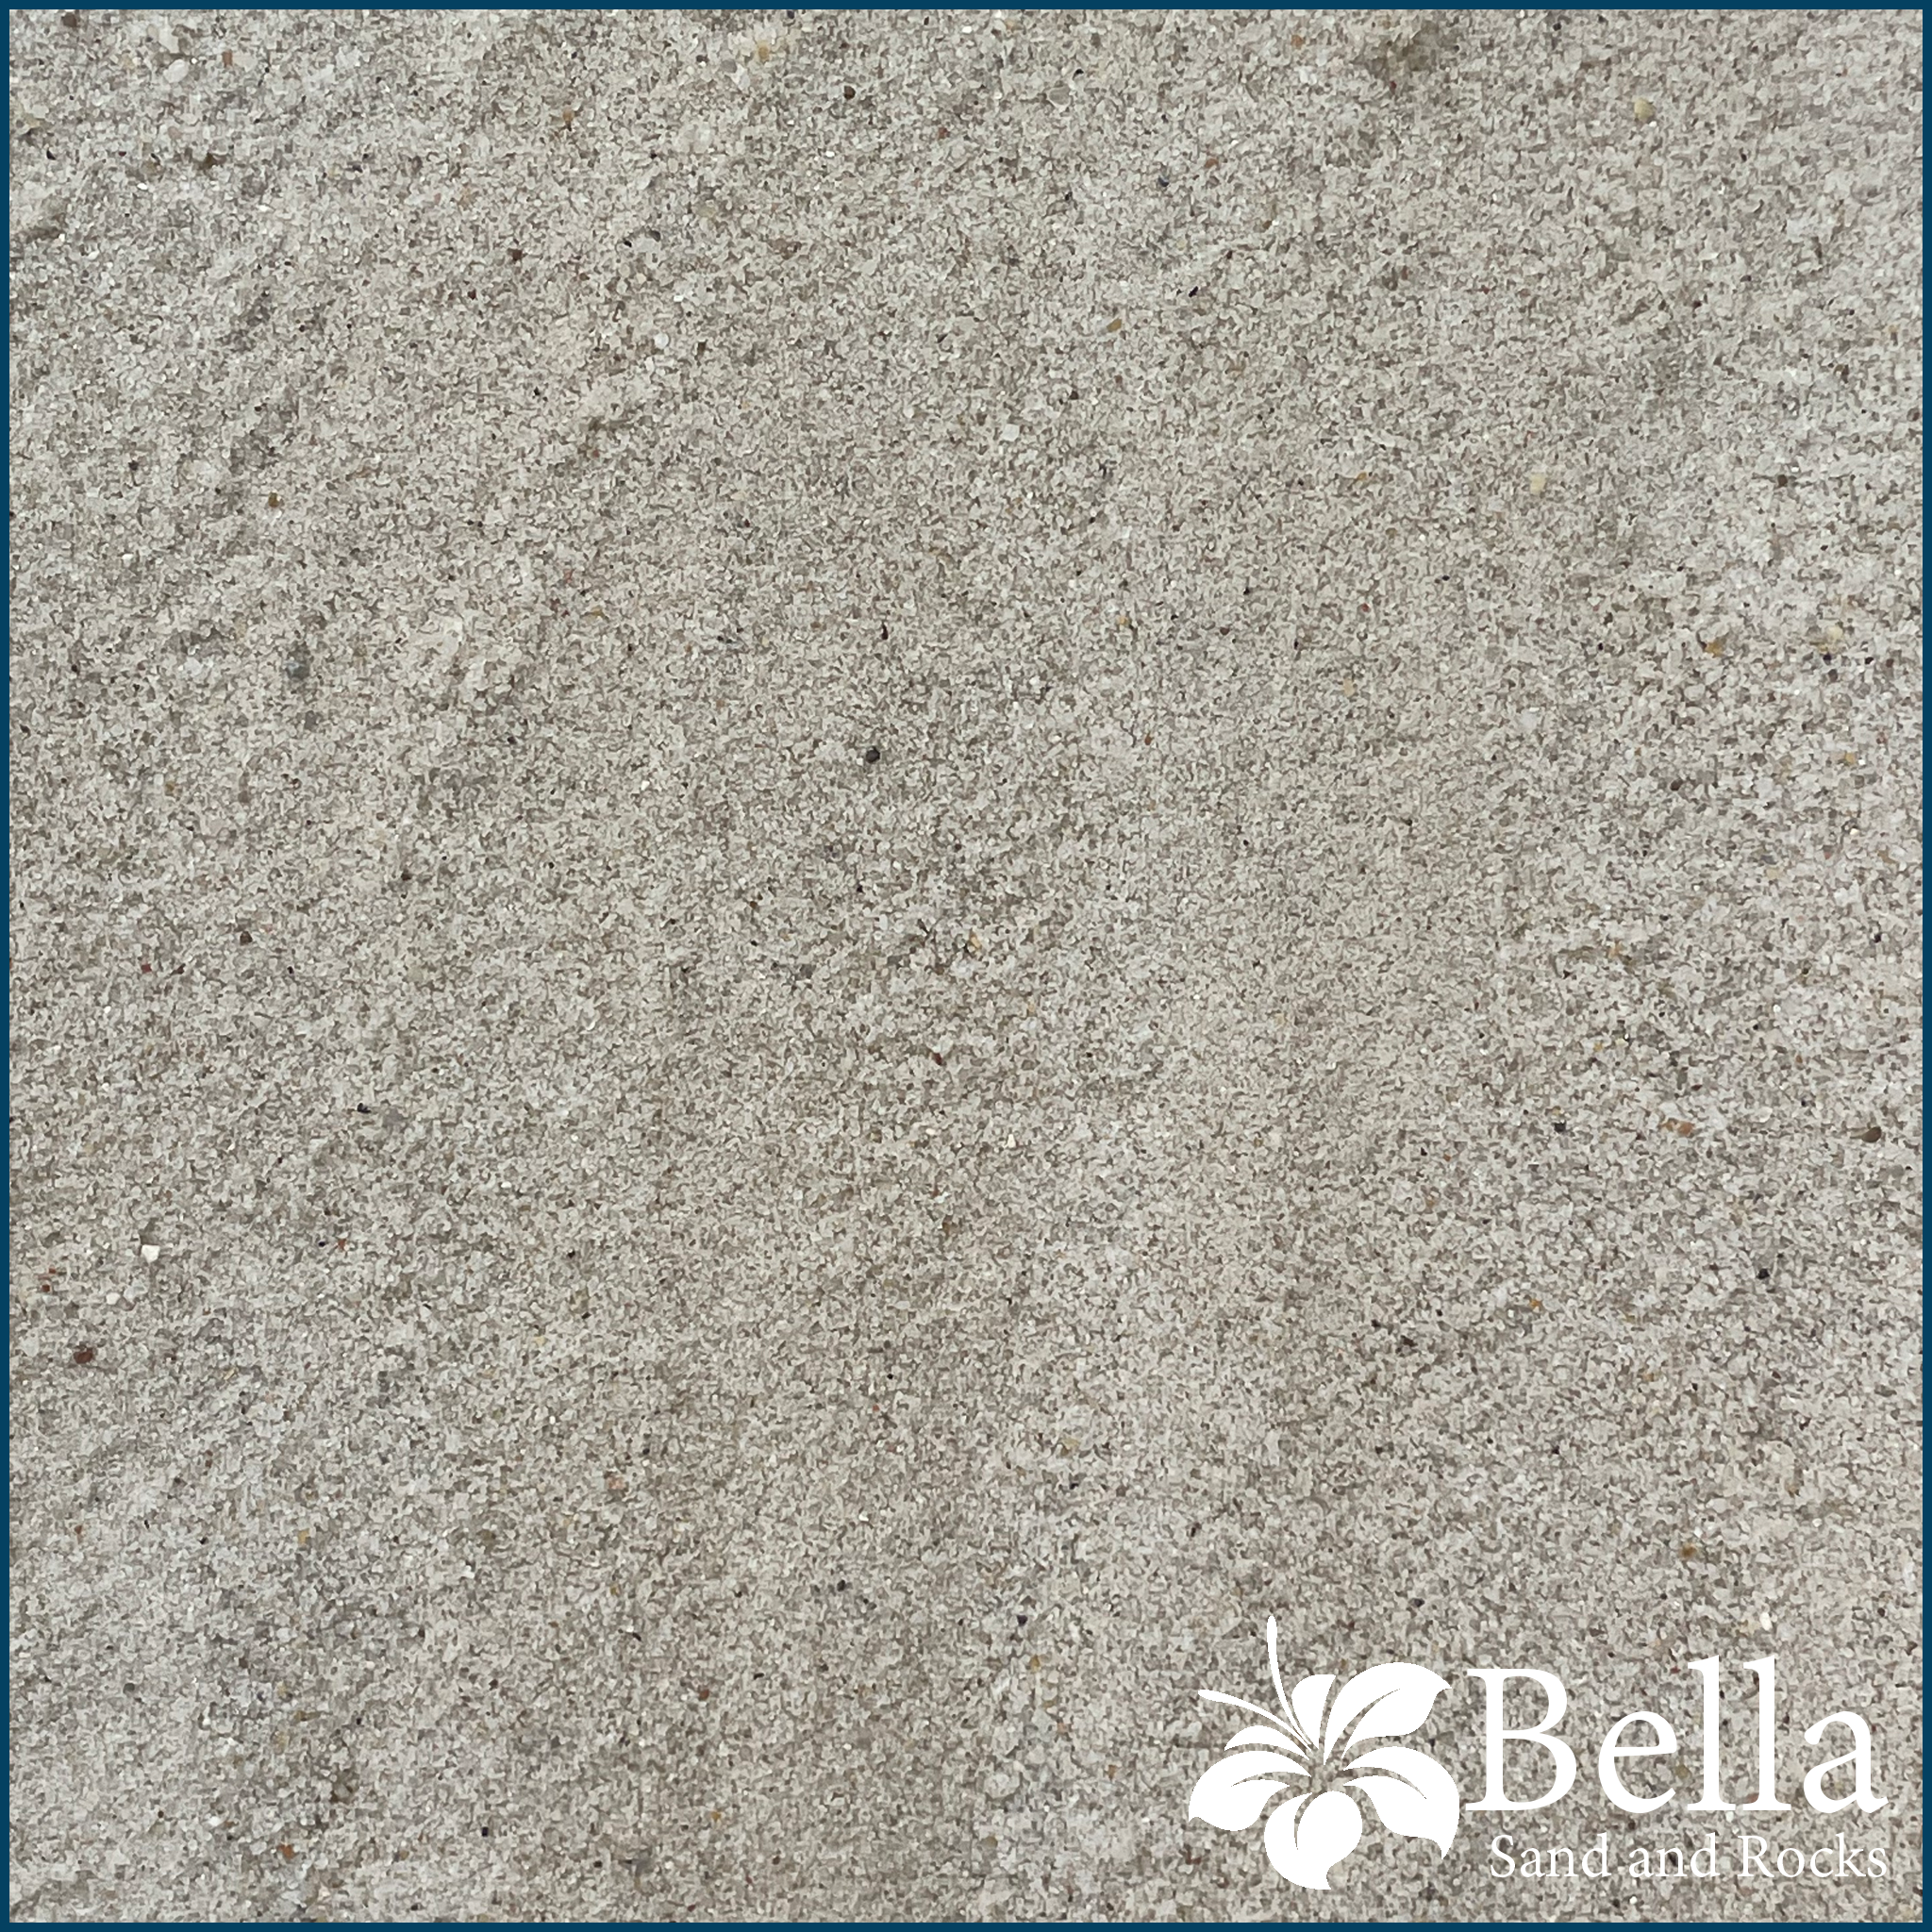 Course Concrete Sand - Bella Sand and Rocks of Tampa Florida